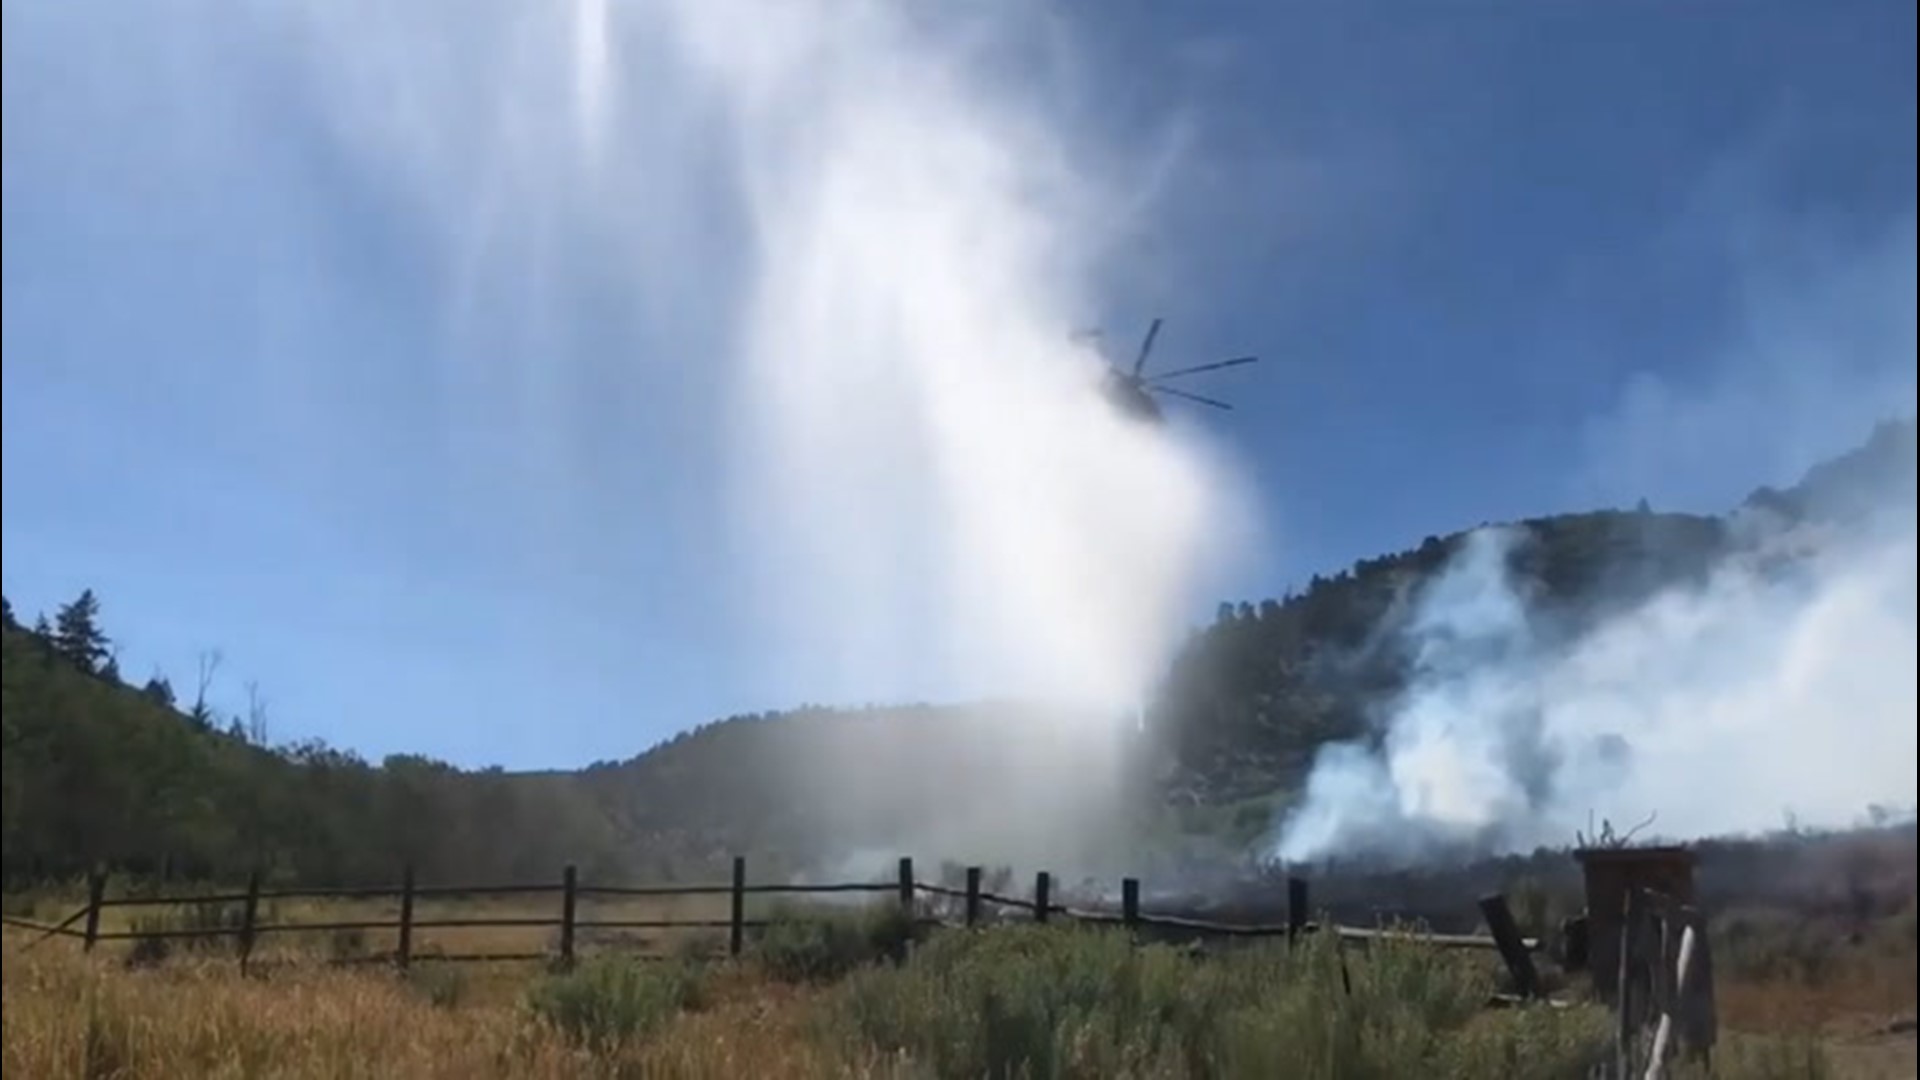 The Pine Gulch Fire in Mesa County, Colorado, burned over 20,000 acres on Aug. 8. This helicopter dropped water to help firefighters put out the fire on Aug. 7.